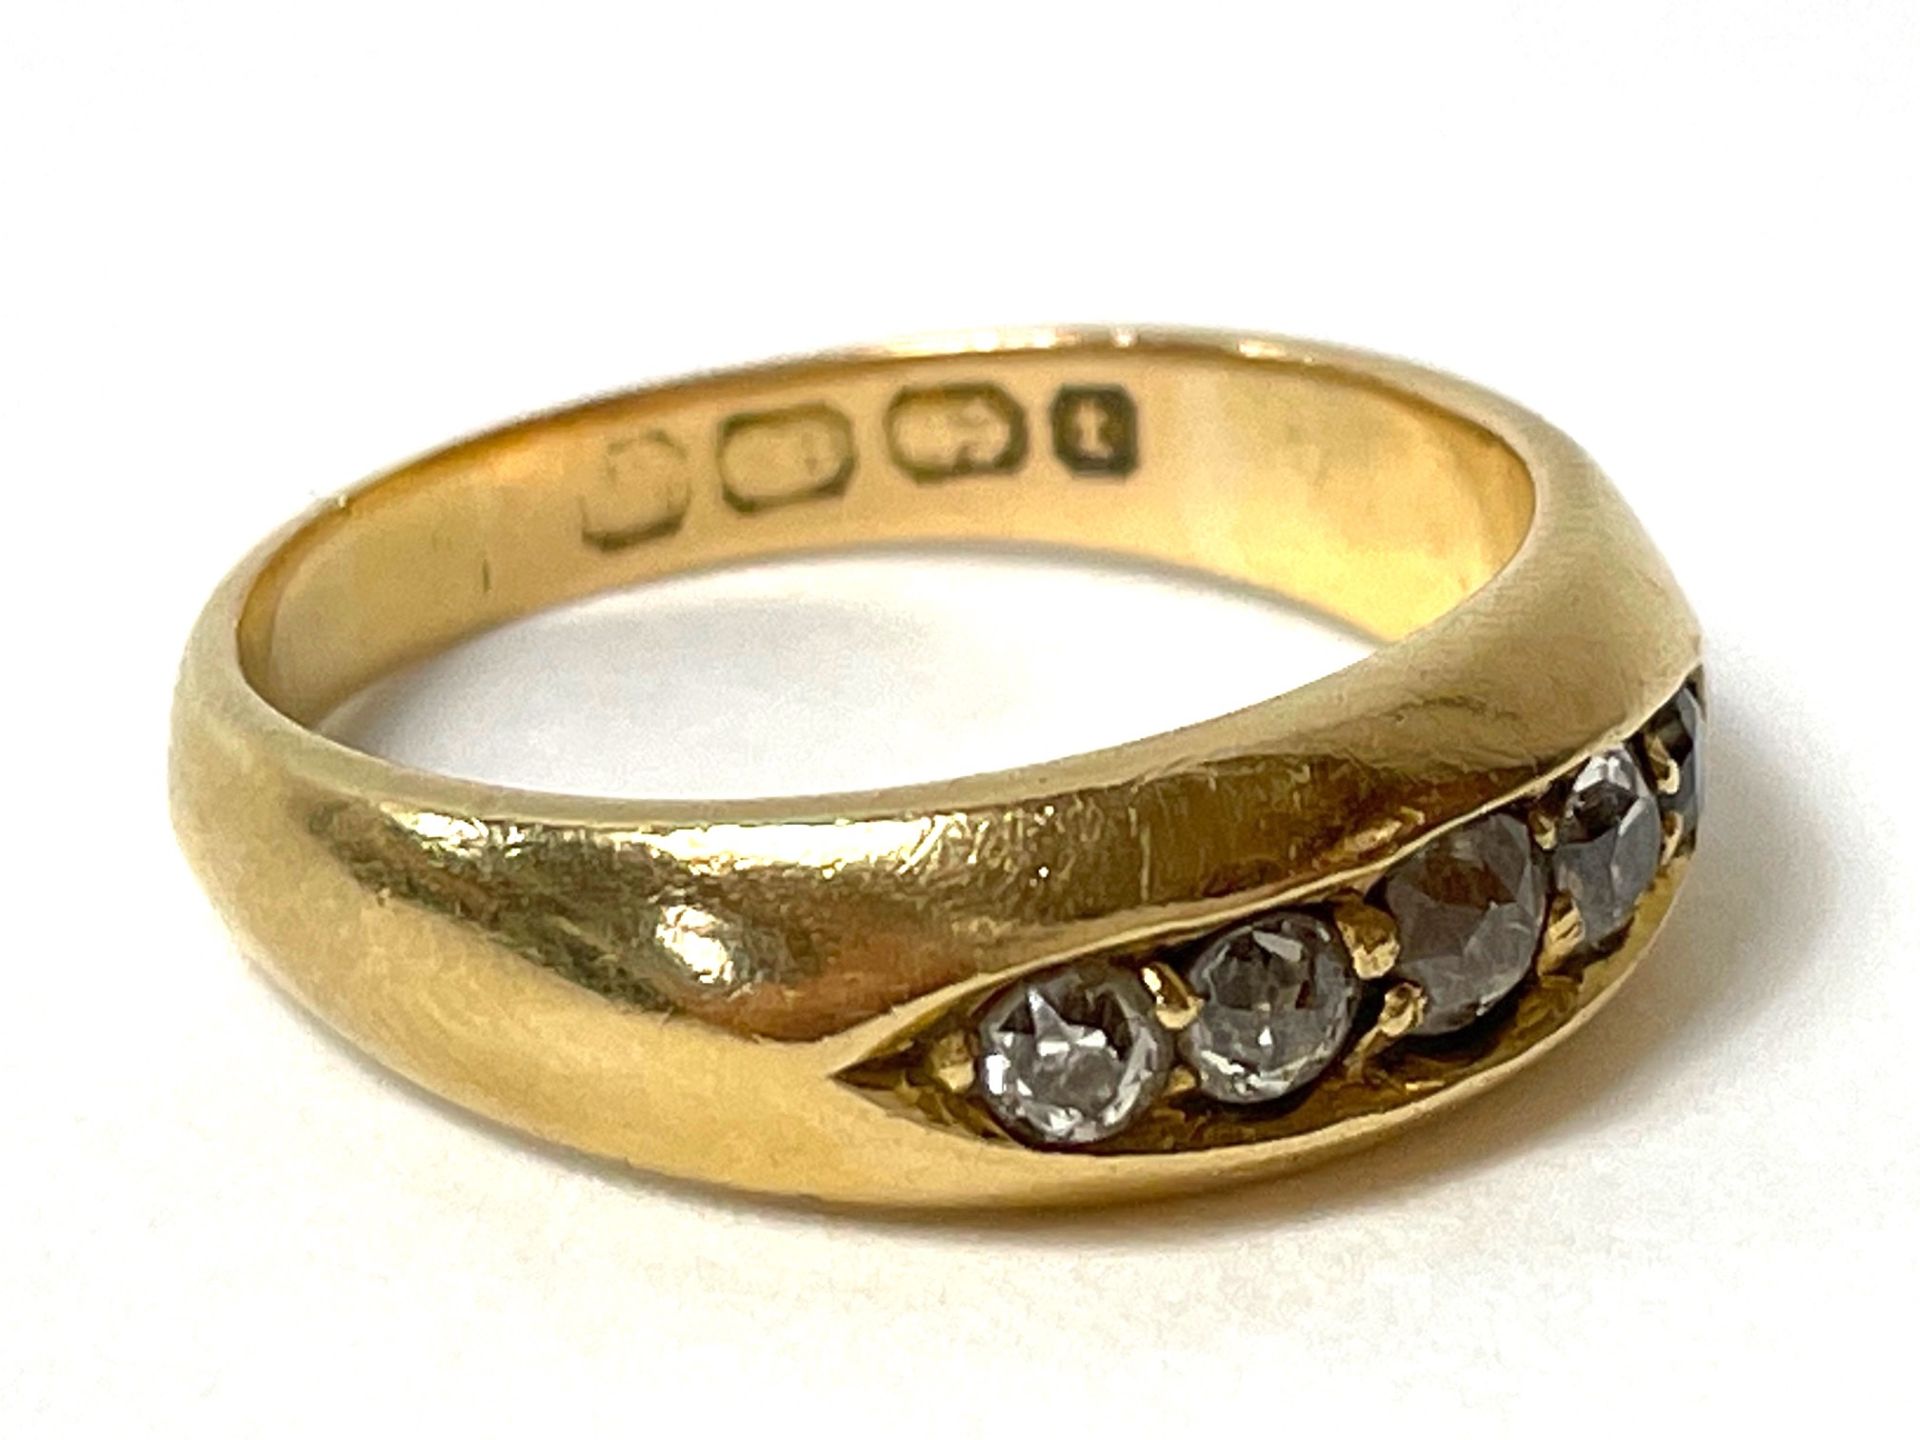 Antique ring with rose-cut diamonds - Image 4 of 6